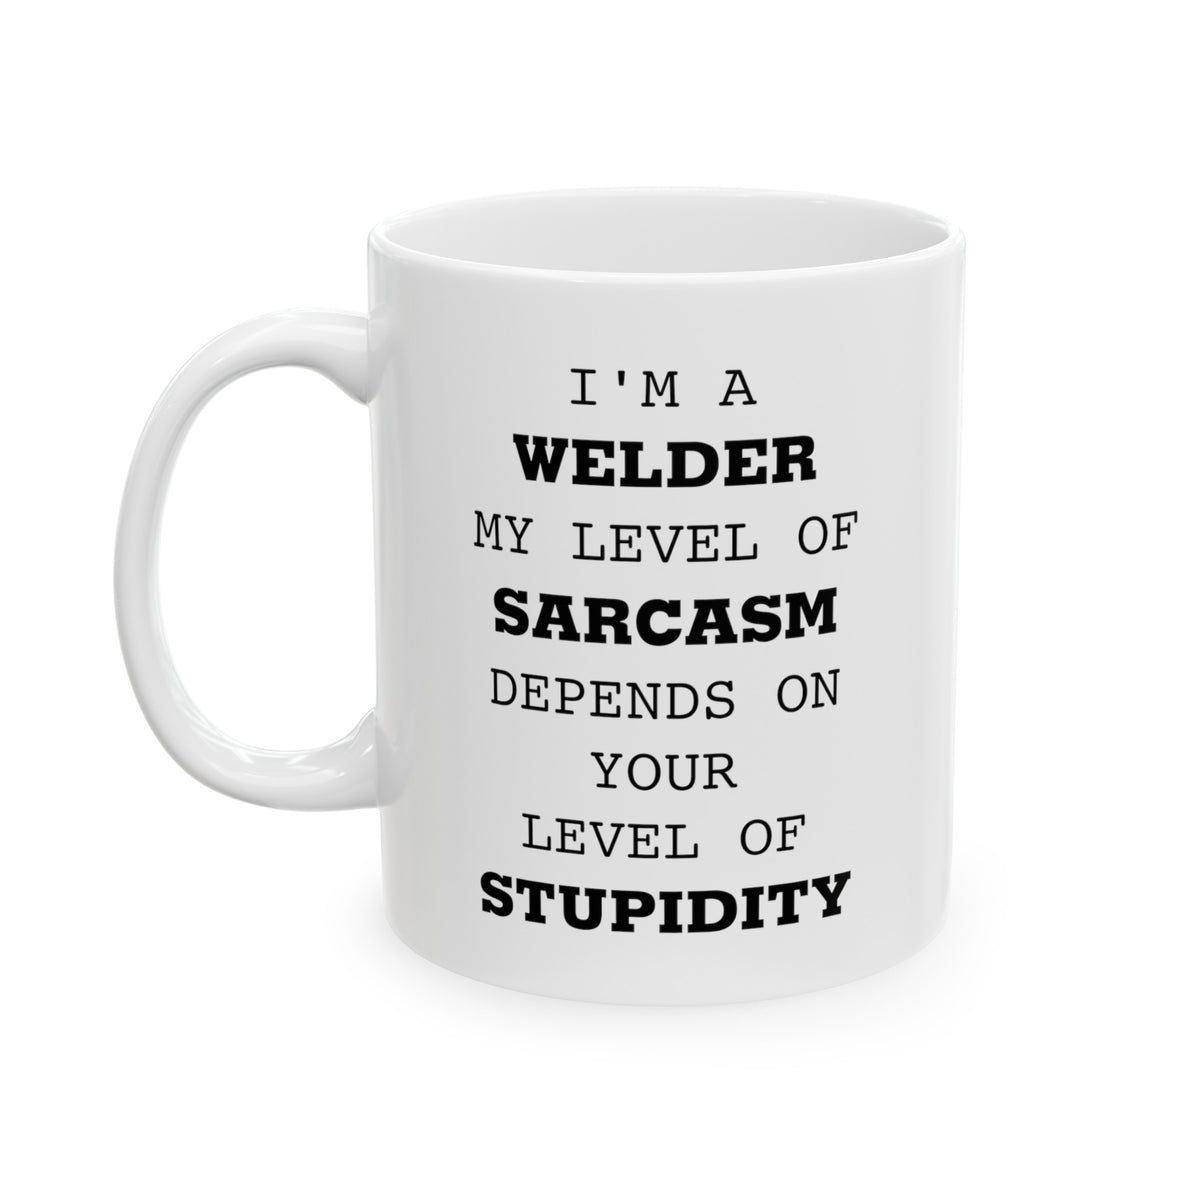 I'm A Welder. My Level Of Sarcasm Depends On Your Level Of Stupidity. - Funny Welder 11oz Coffee Mug - Best Inspirational Gifts For Men And Women